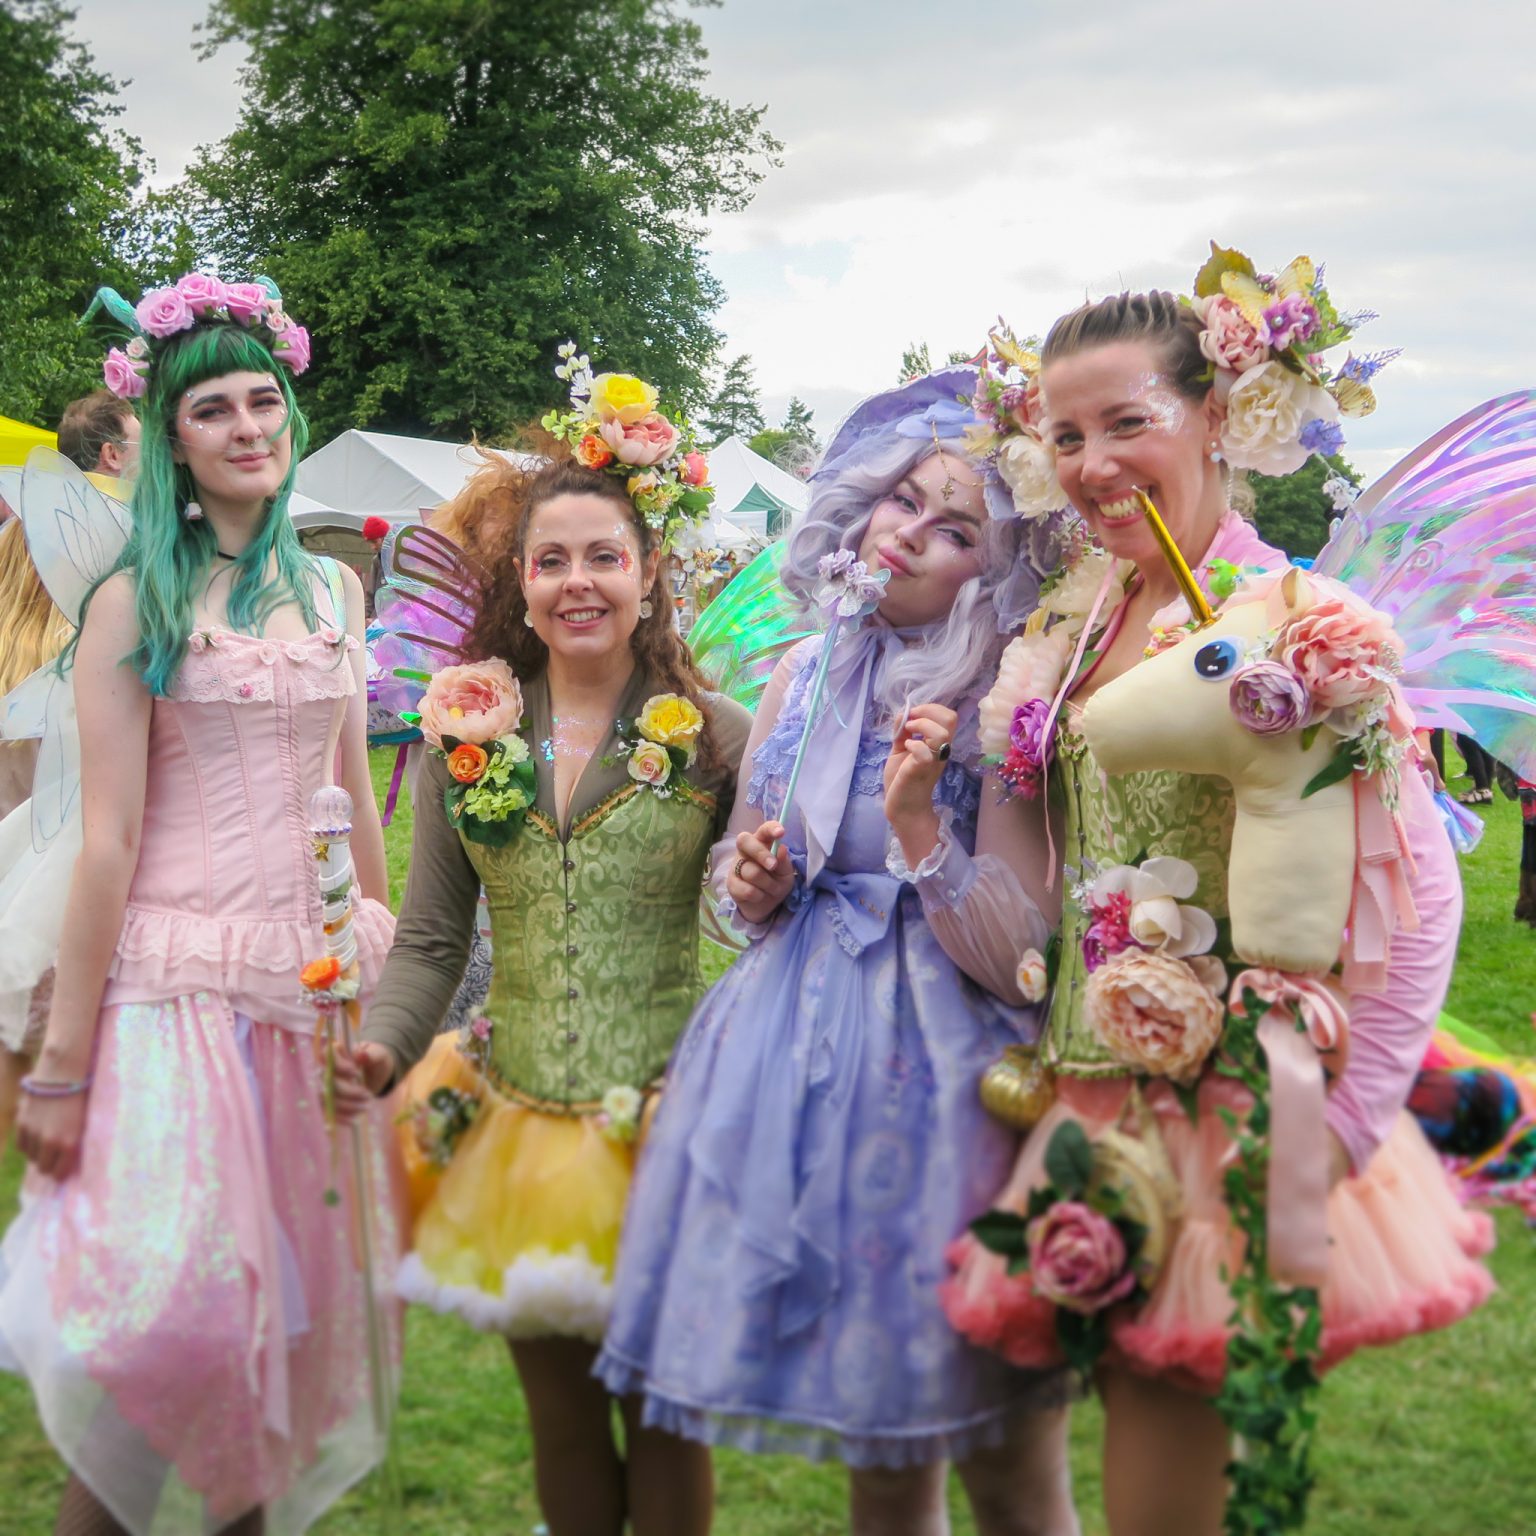 Why the New Forest Fairy Festival was cancelled Threads of a Fairytale